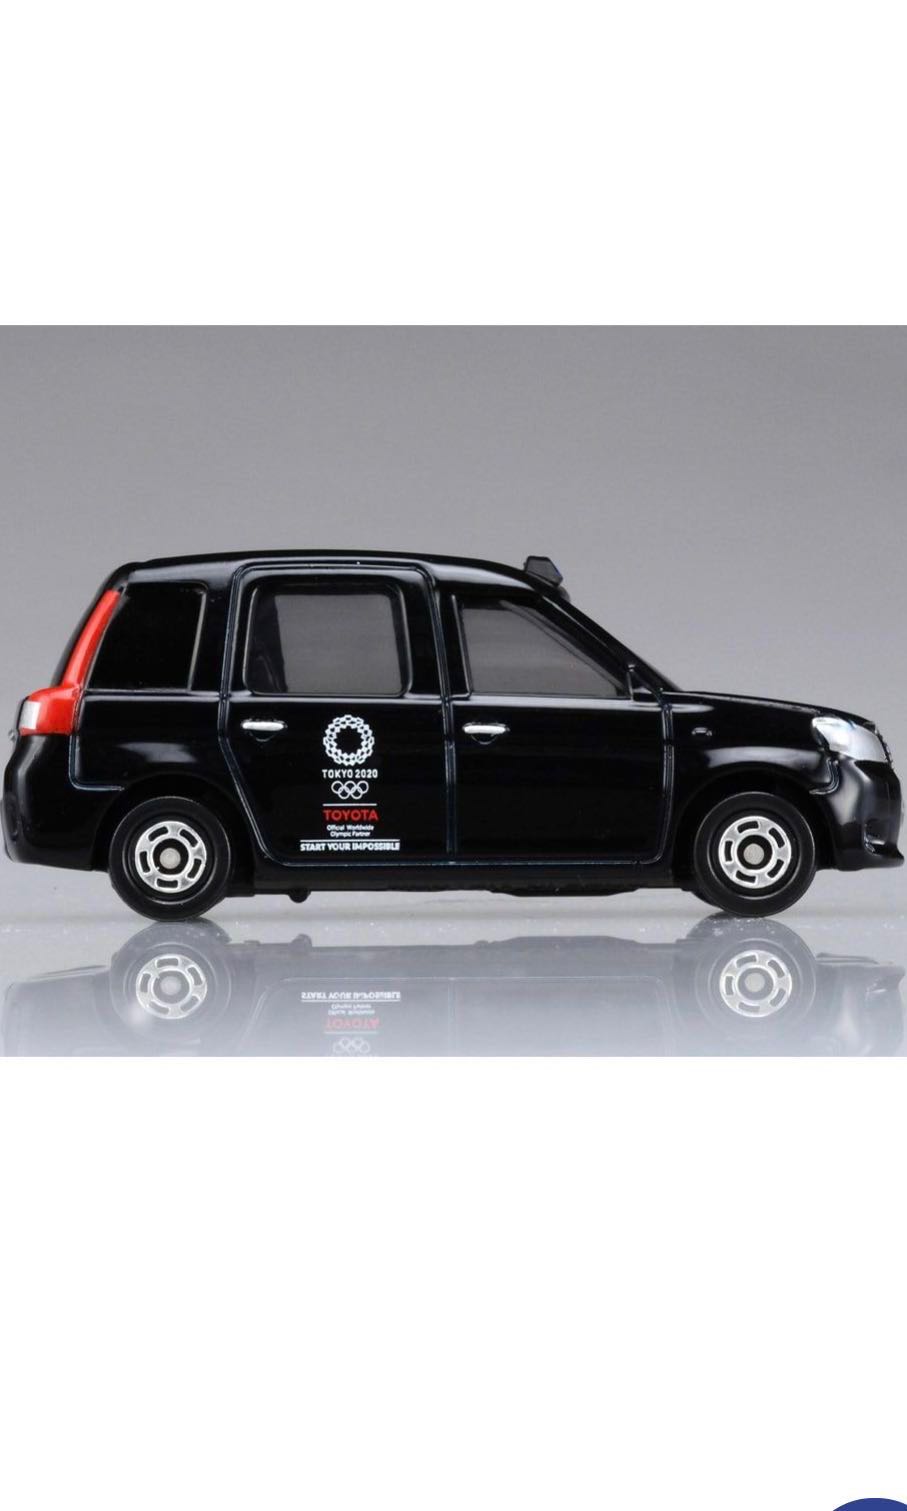 Tomica Tokyo 2020 Olympic and Paralympic Games Limited Diecast